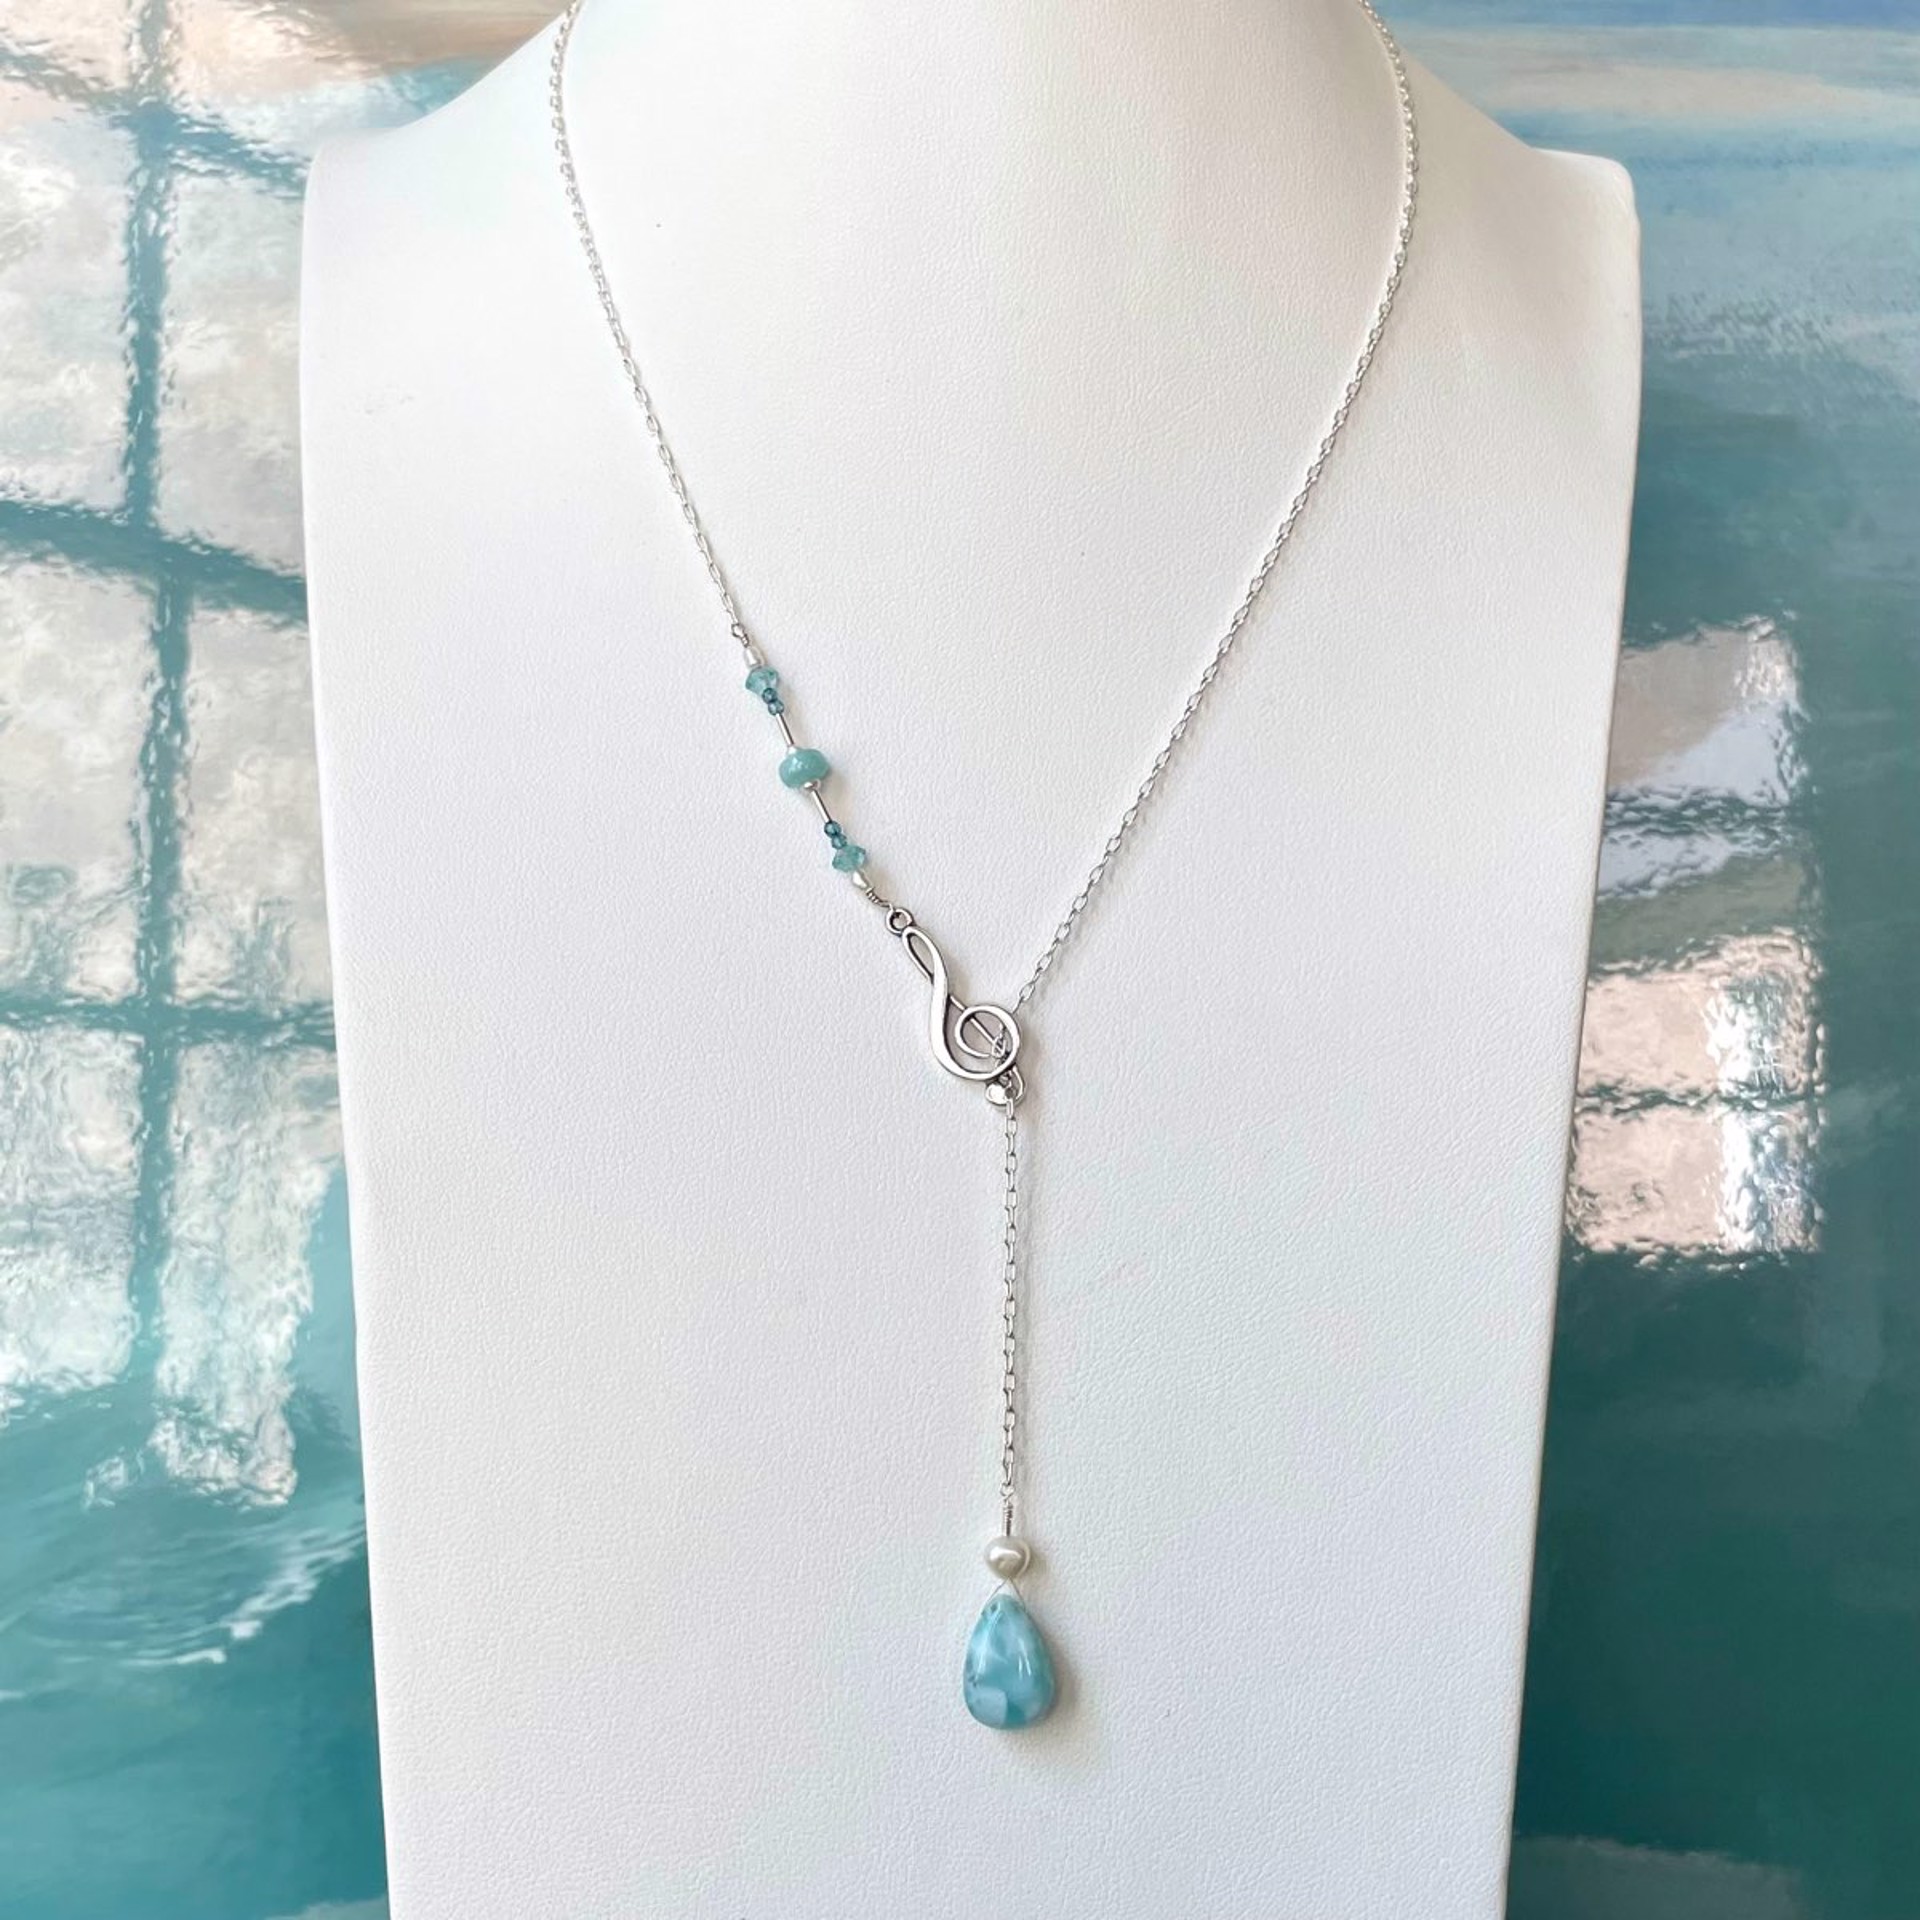 Larimar, Apatite, Pearls, and Sterling Silver Treble Clef Necklace by Lisa Kelley